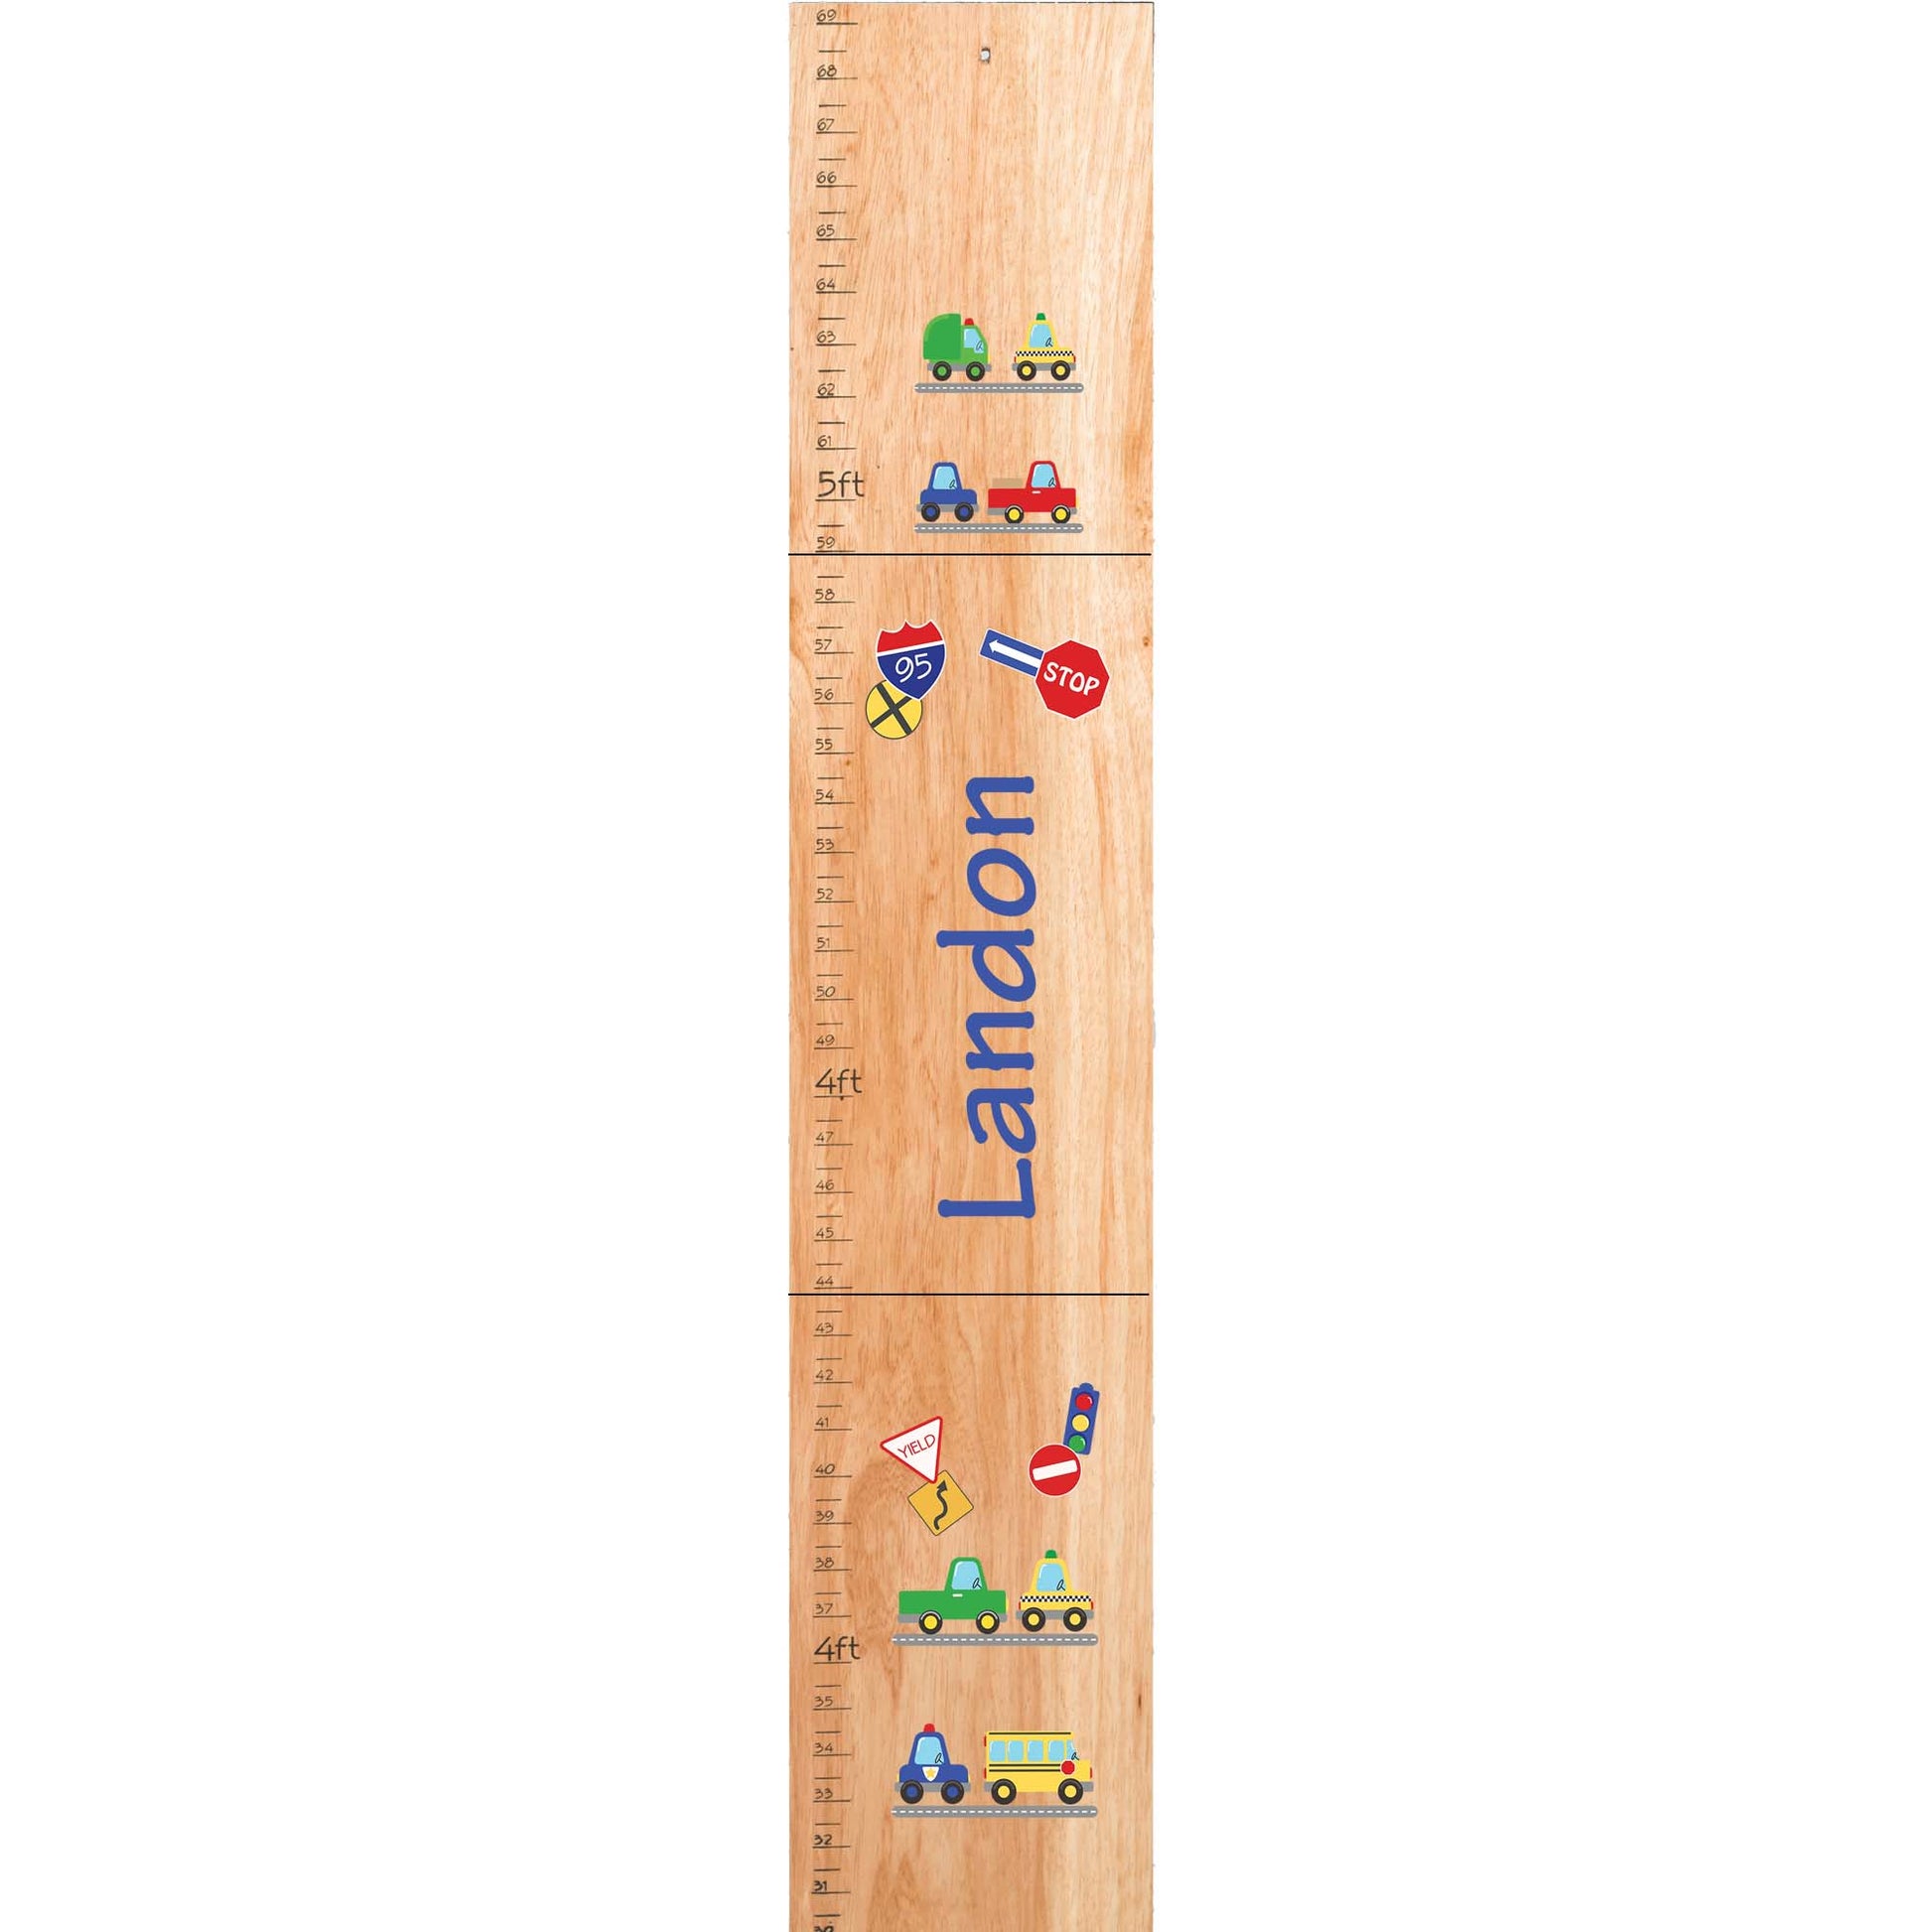 Personalized Natural Growth Chart With Jungle Design